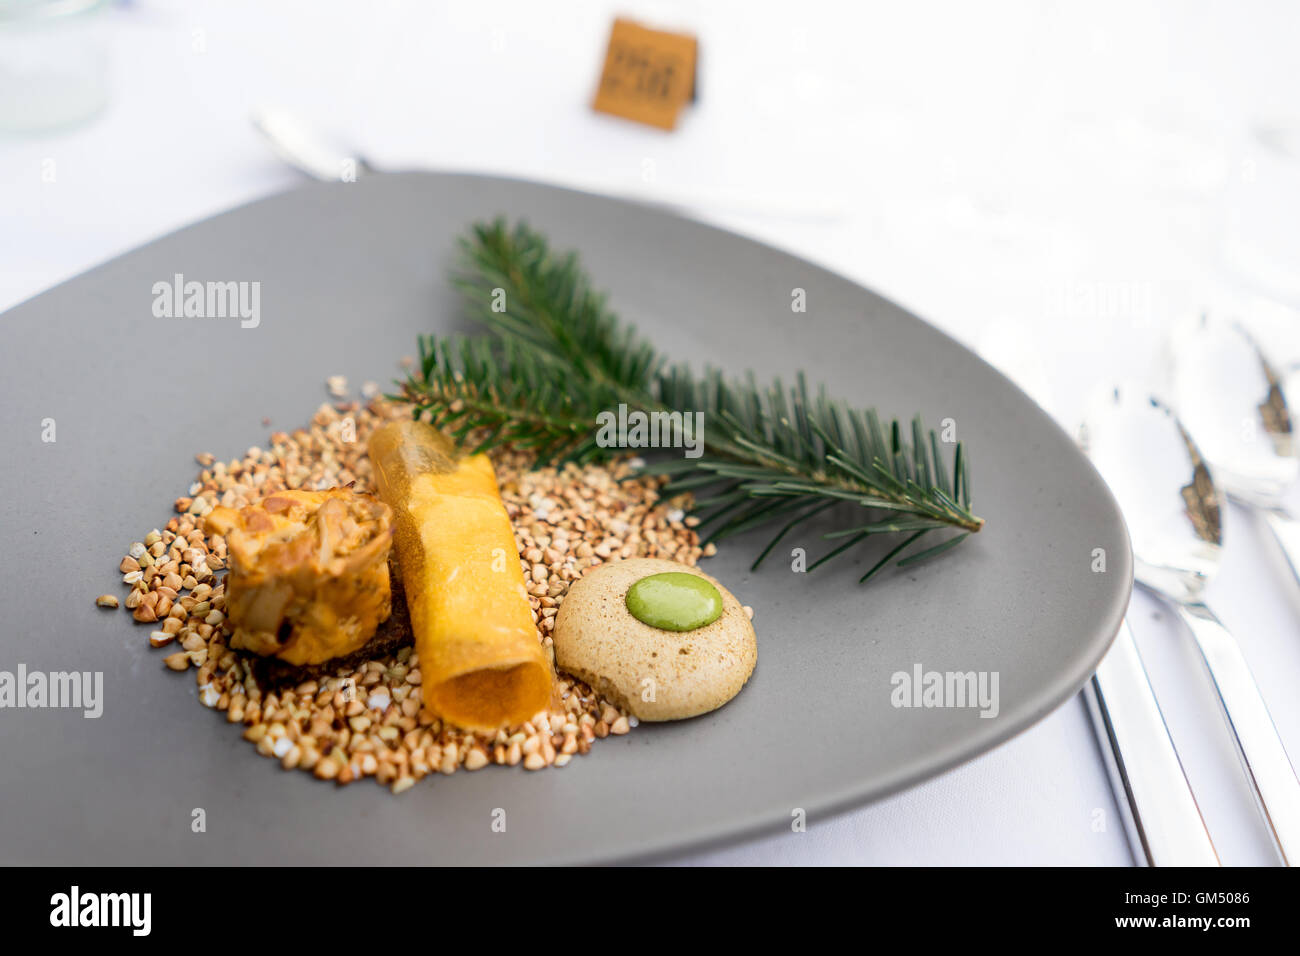 First course at the 'Langen Tafel der Genusshauptstadt Graz' with mushrooms and herbs on buckwheat on grey plate Stock Photo